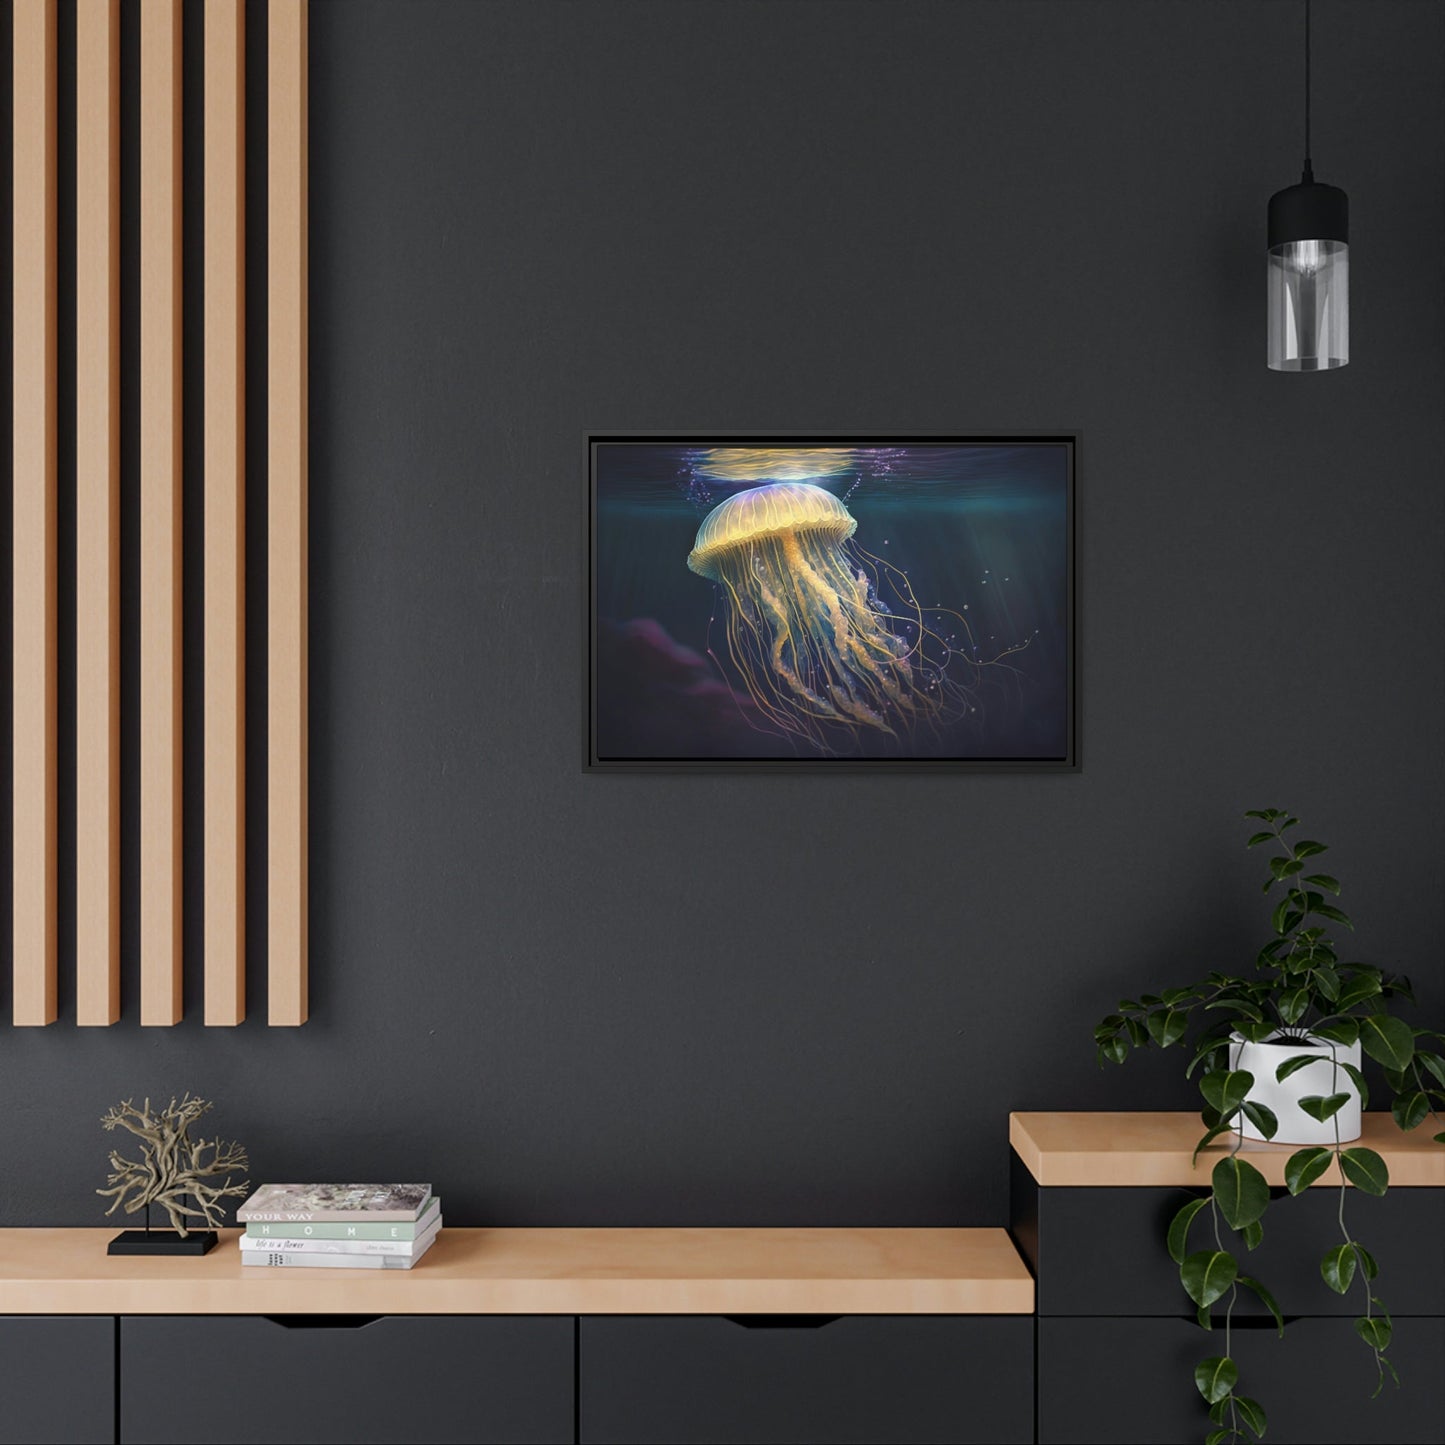 Jellyfish Wonder: Captivating Canvas Wall Art Prints for Ocean Lovers